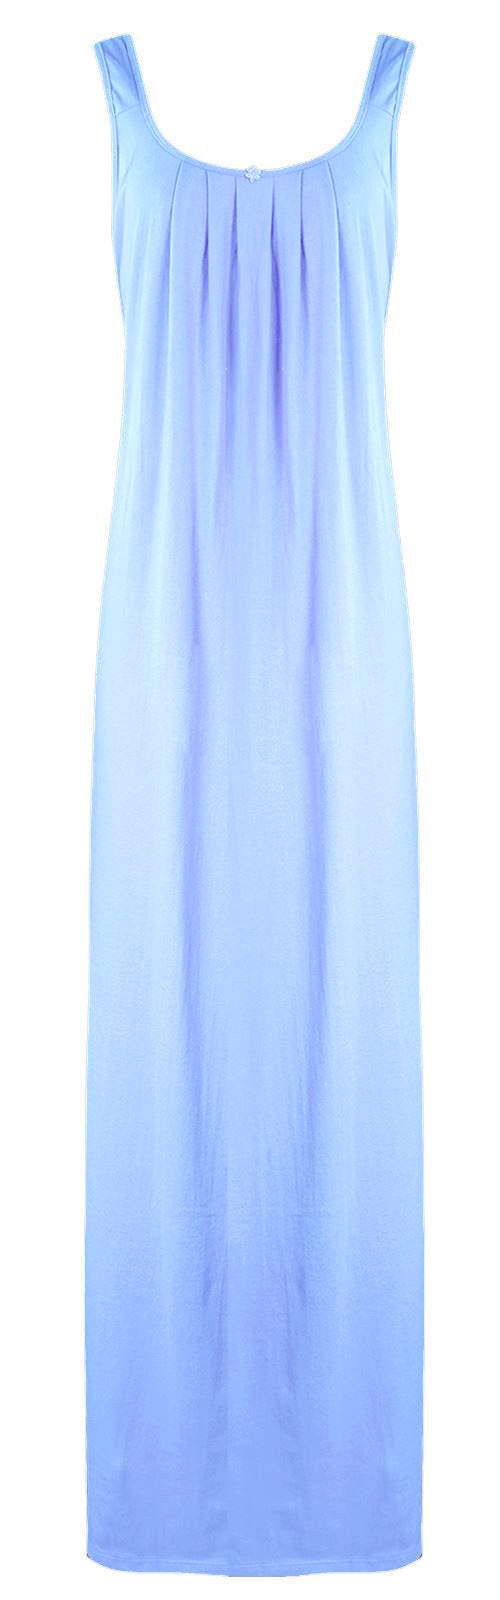 Sky Blue / One Size Cotton Nighty Slip Heart Print / Plain Night Gown Free Size The Orange Tags